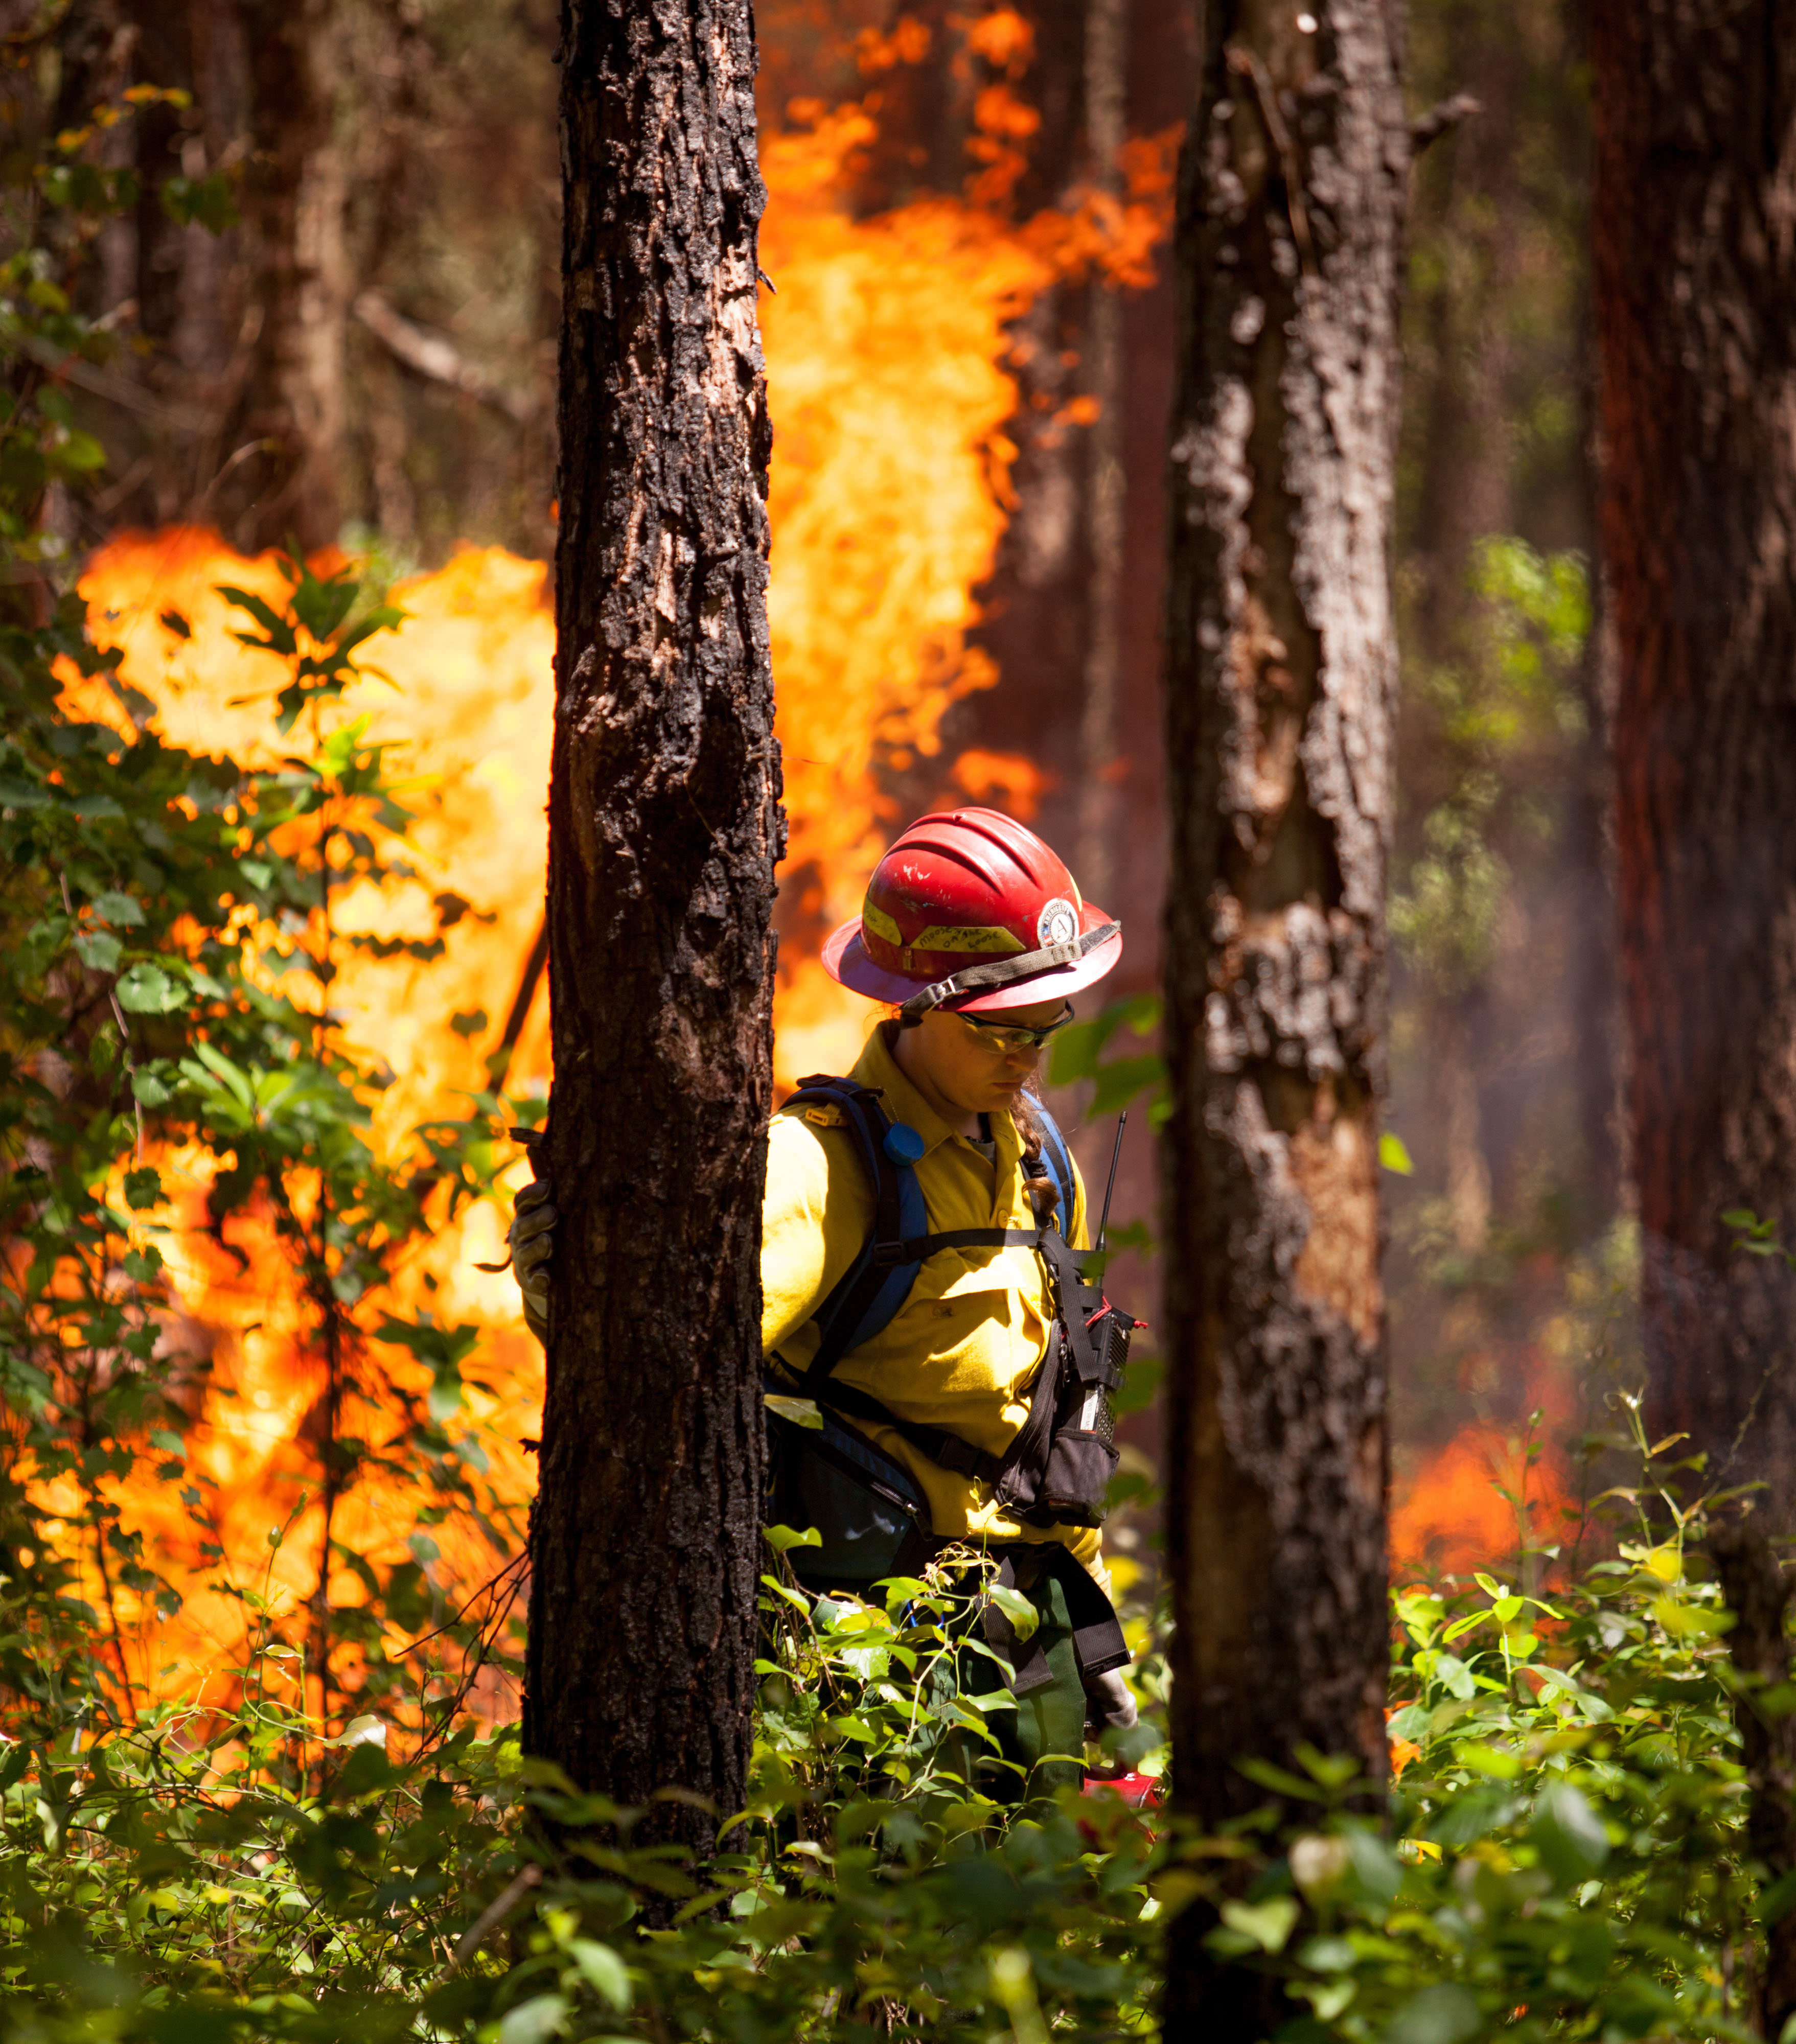 A burn crew member in fire-protective gear walks among pine trees with flames in the background.